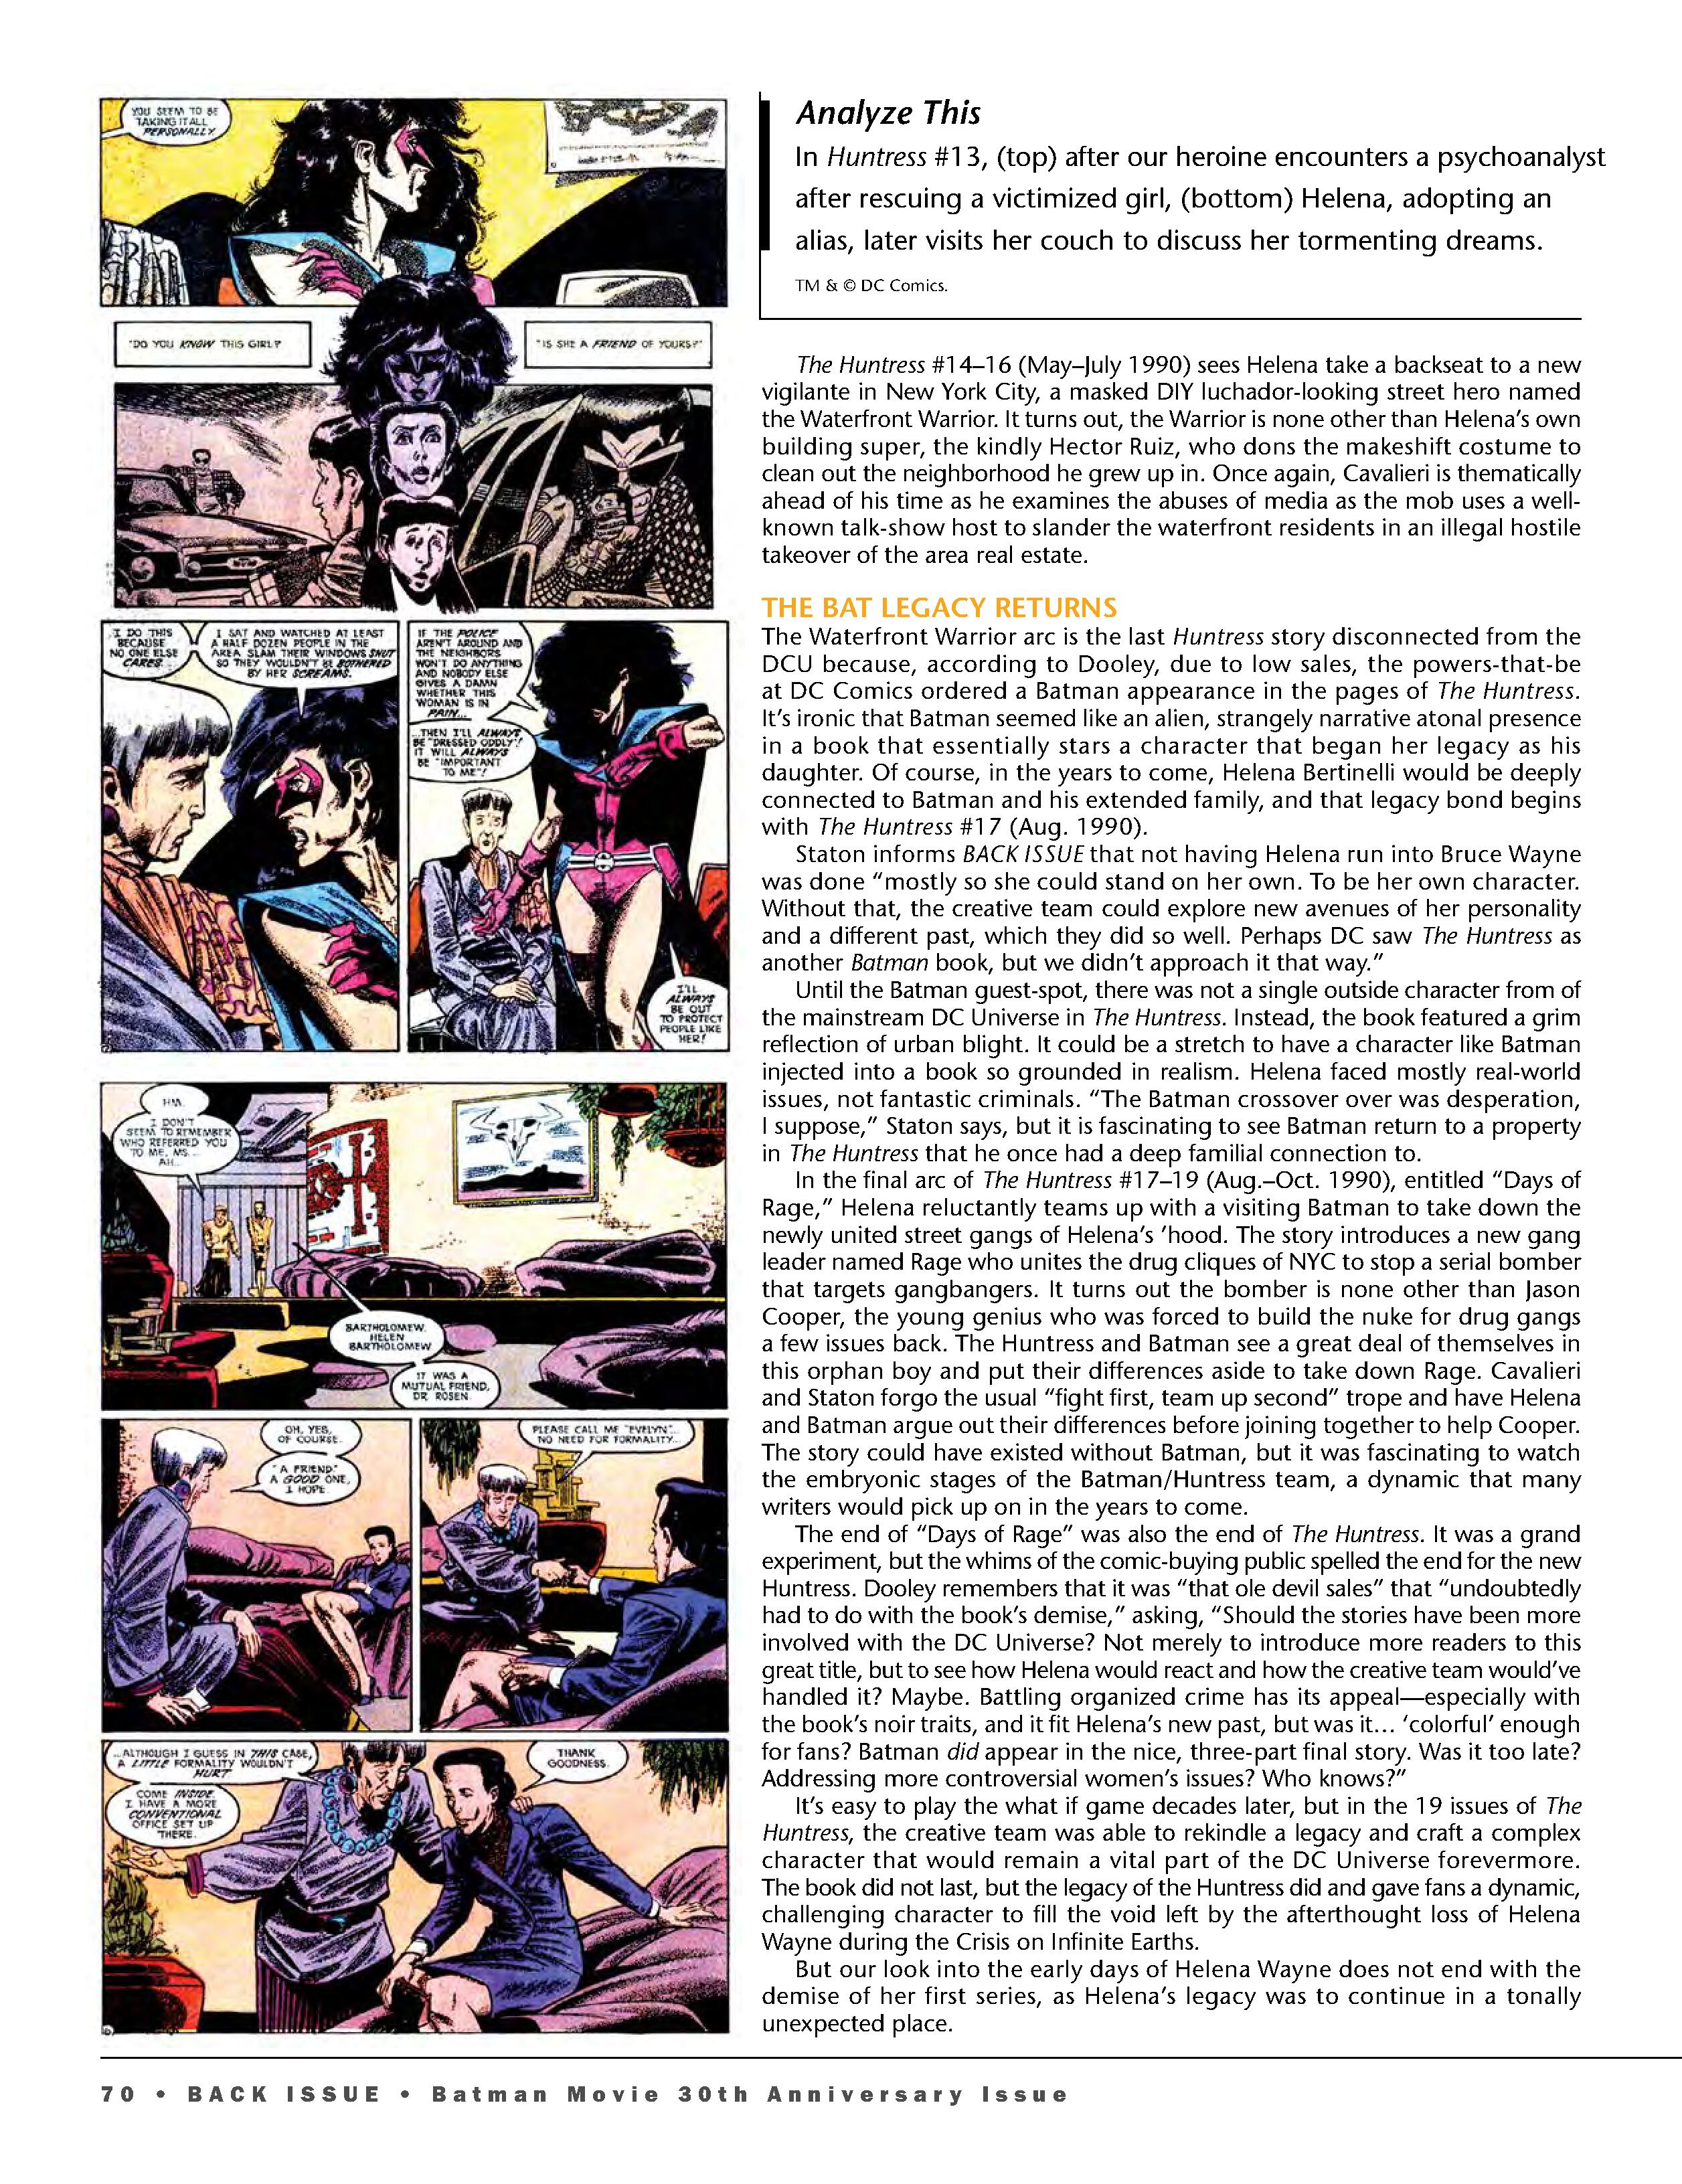 Read online Back Issue comic -  Issue #113 - 72